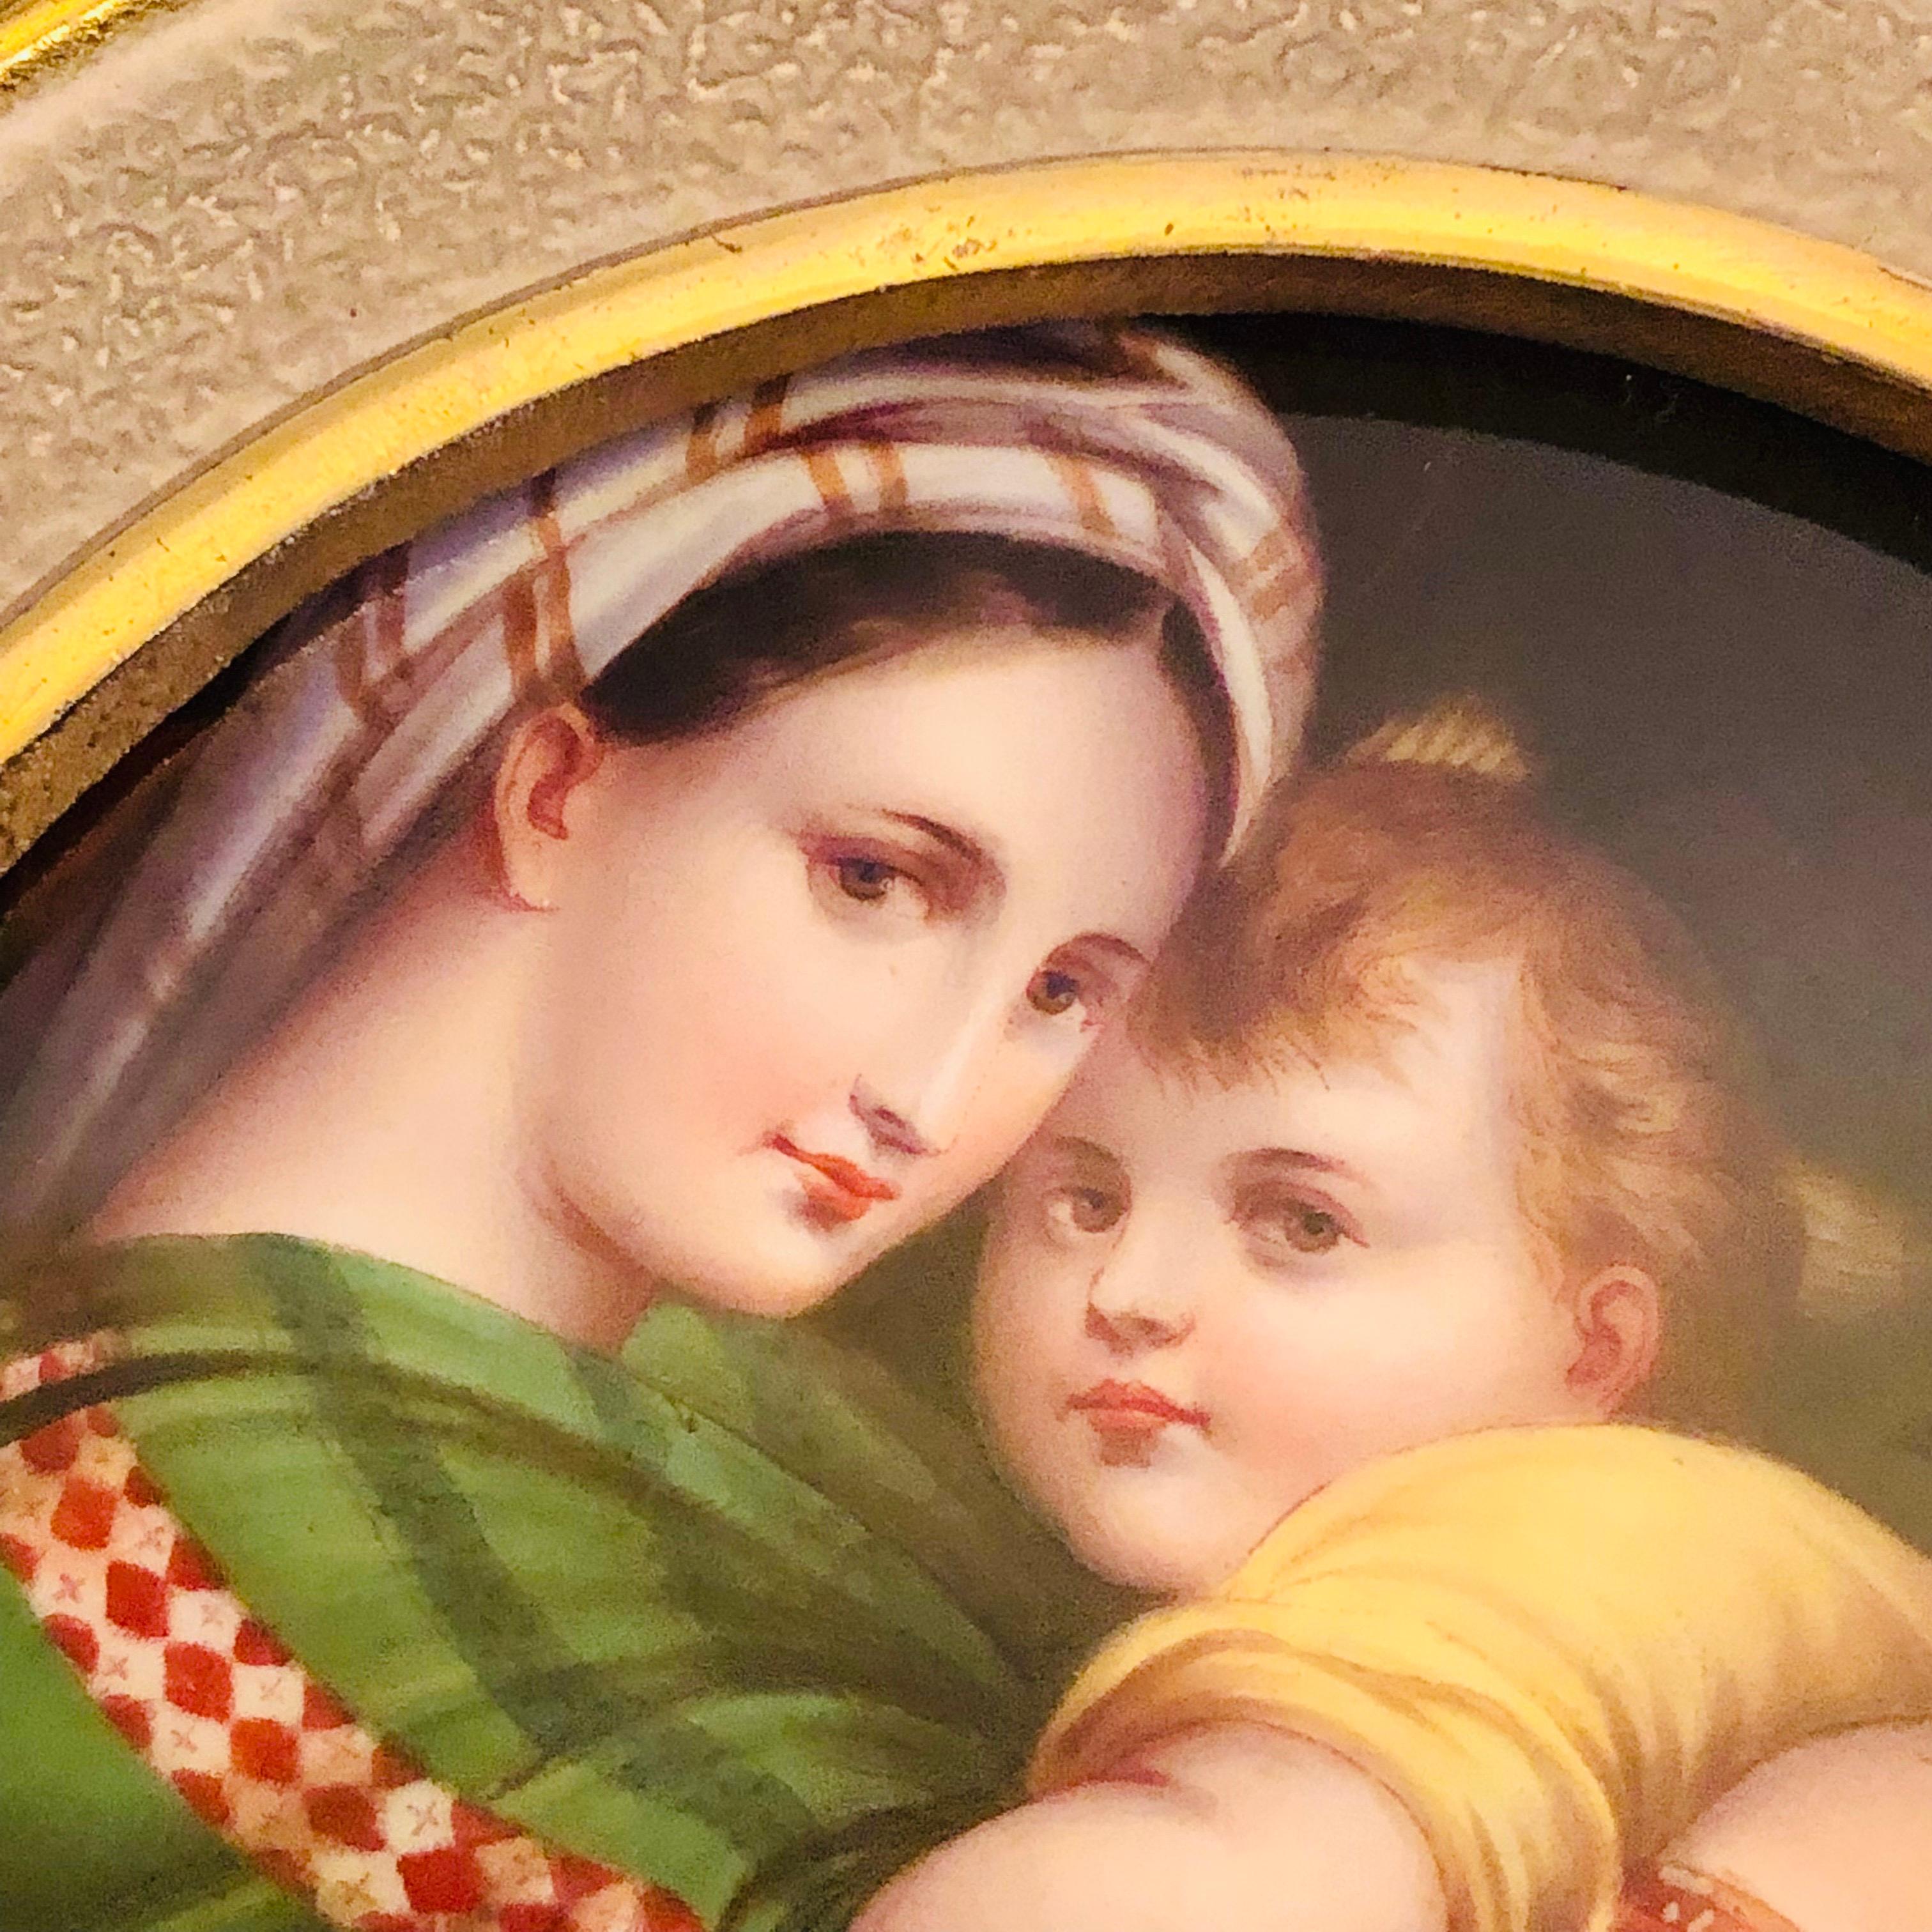 Renaissance KPM Porcelain Plaque of Mary and Her Child after Madonna of the Chair Painting For Sale